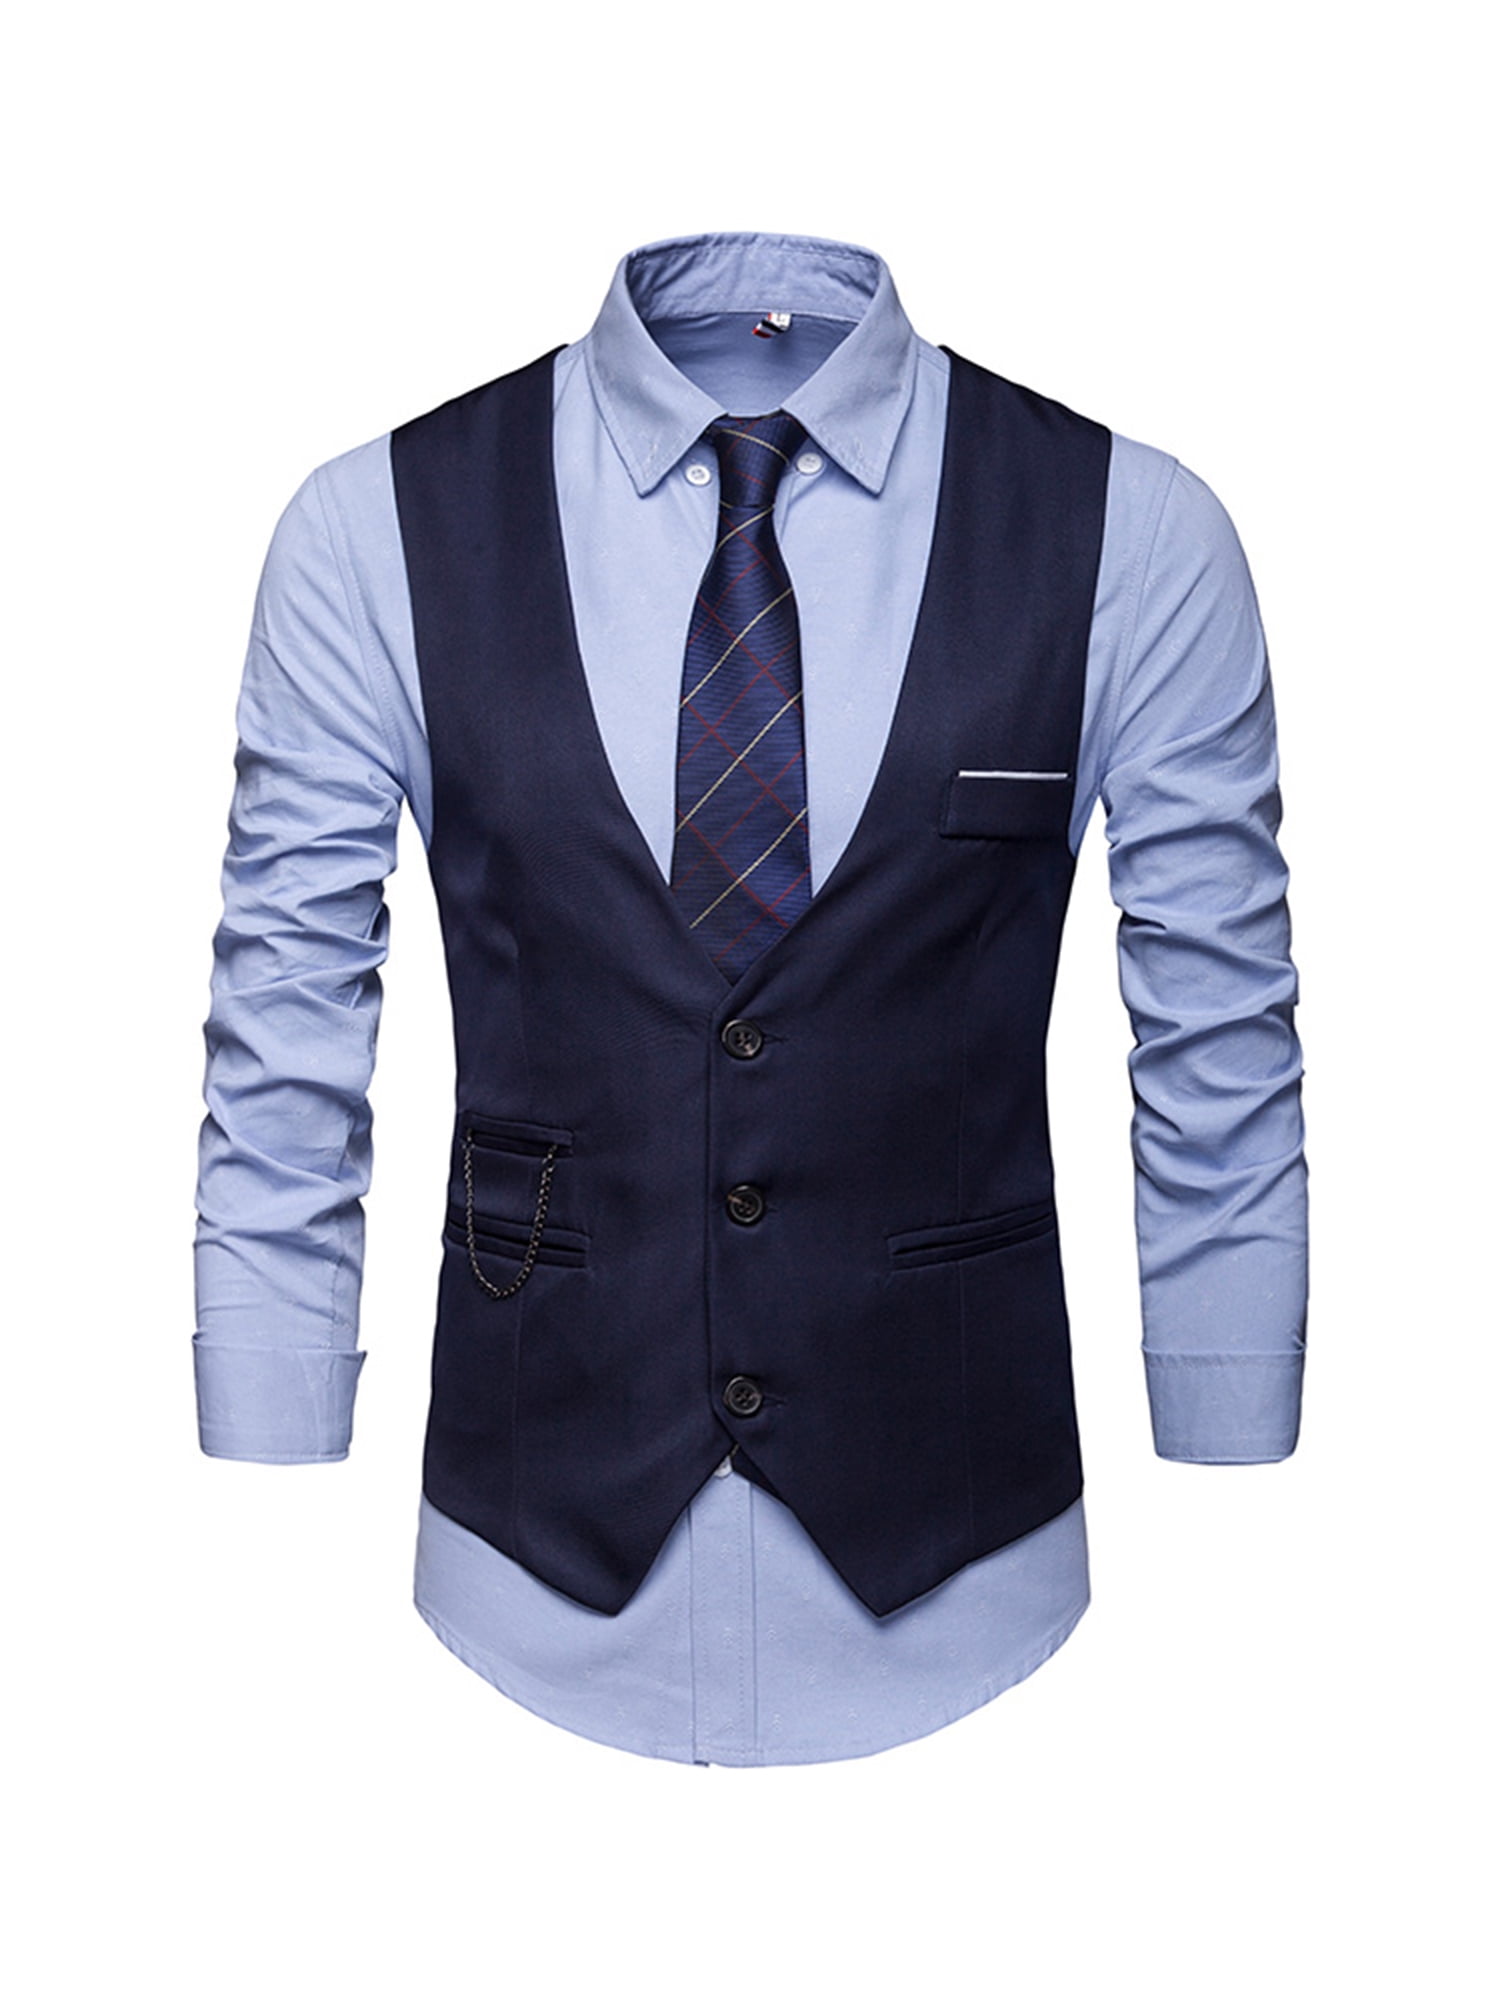 TheFound Mens Business Waistcoat Suit Dress Sleeveless Single-Breasted ...